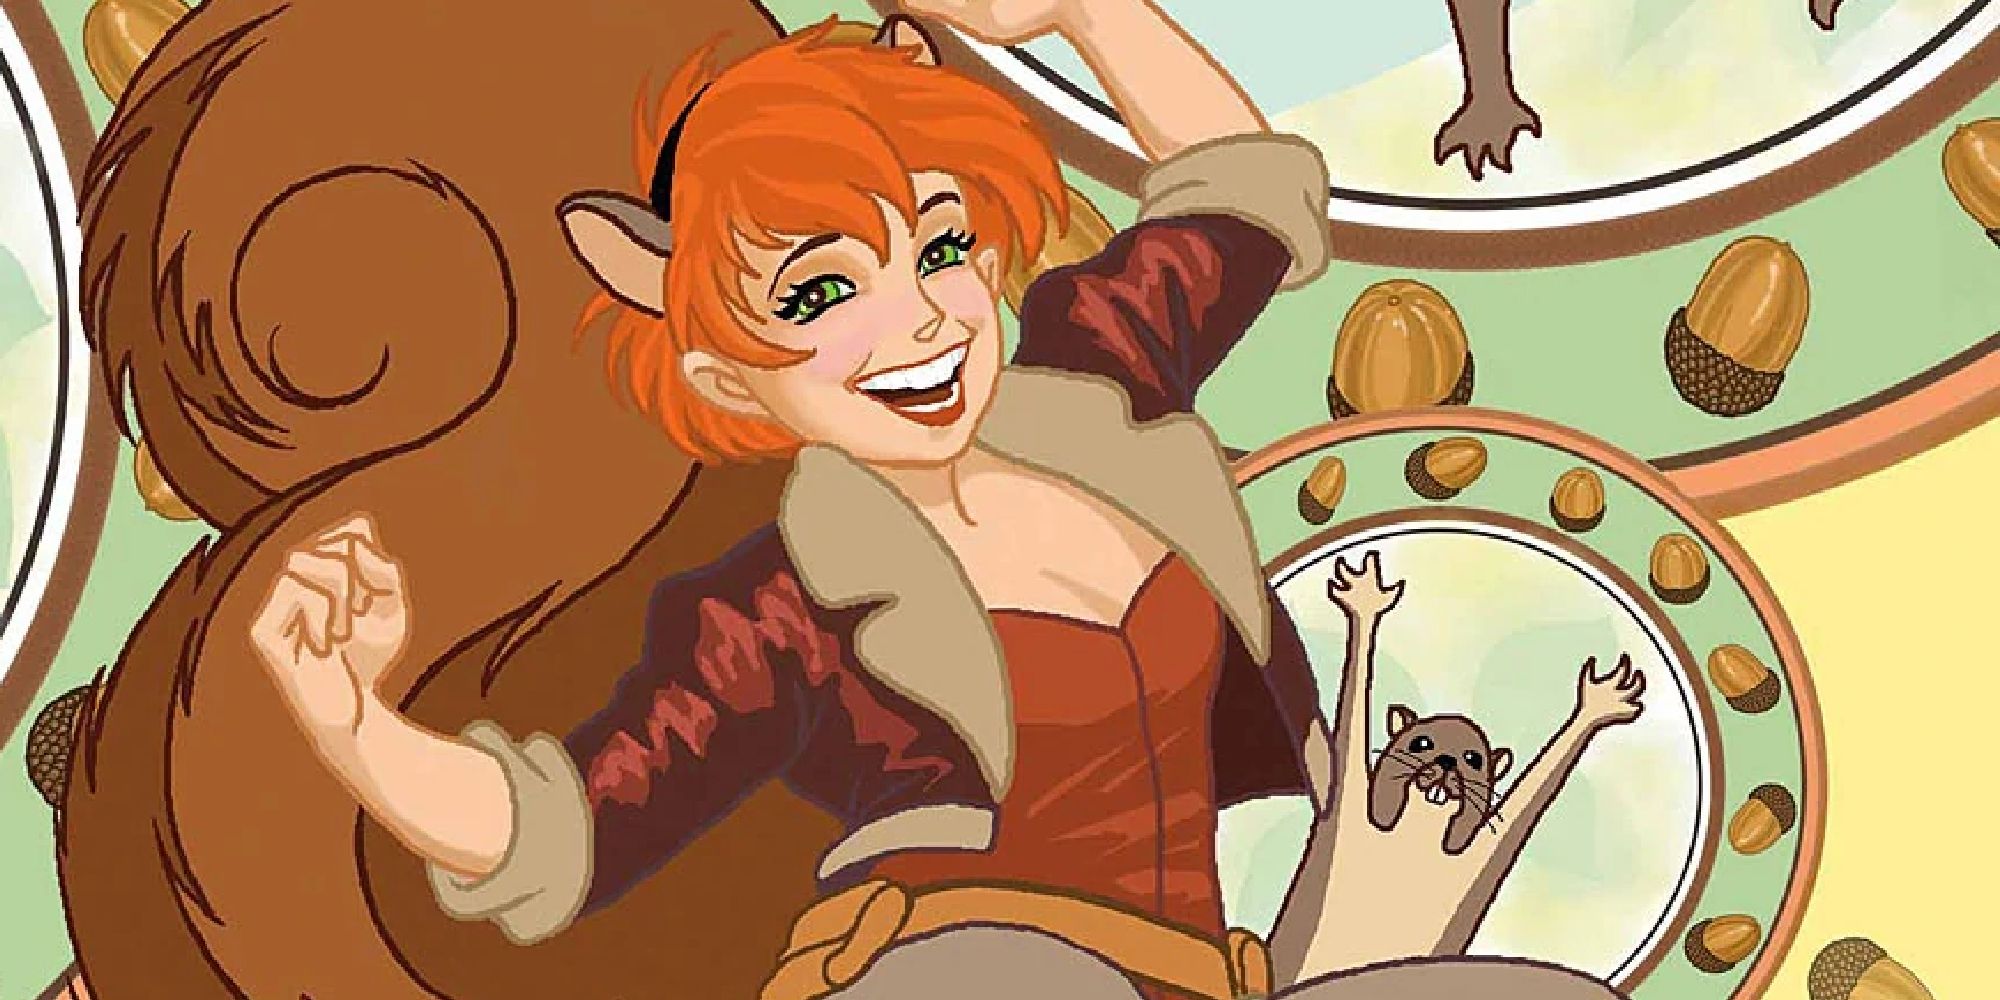 Squirrel Girl celebrating with squirrels in the comics